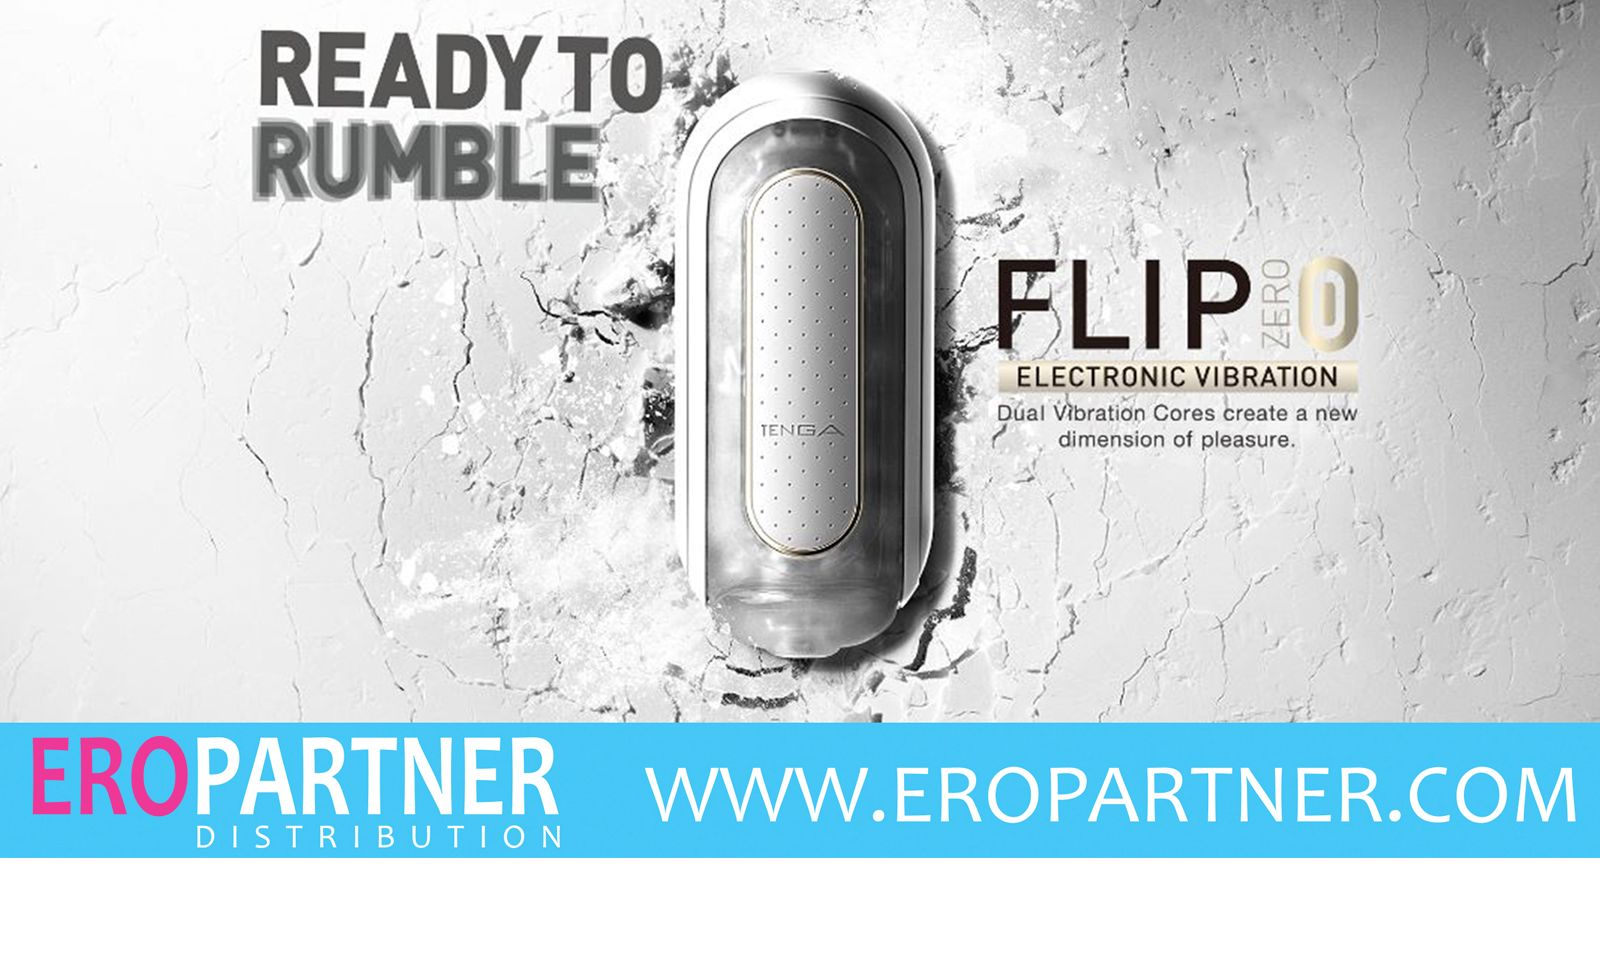 Tenga Flip Zero Now Exclusively Available At Eropartner Distribut